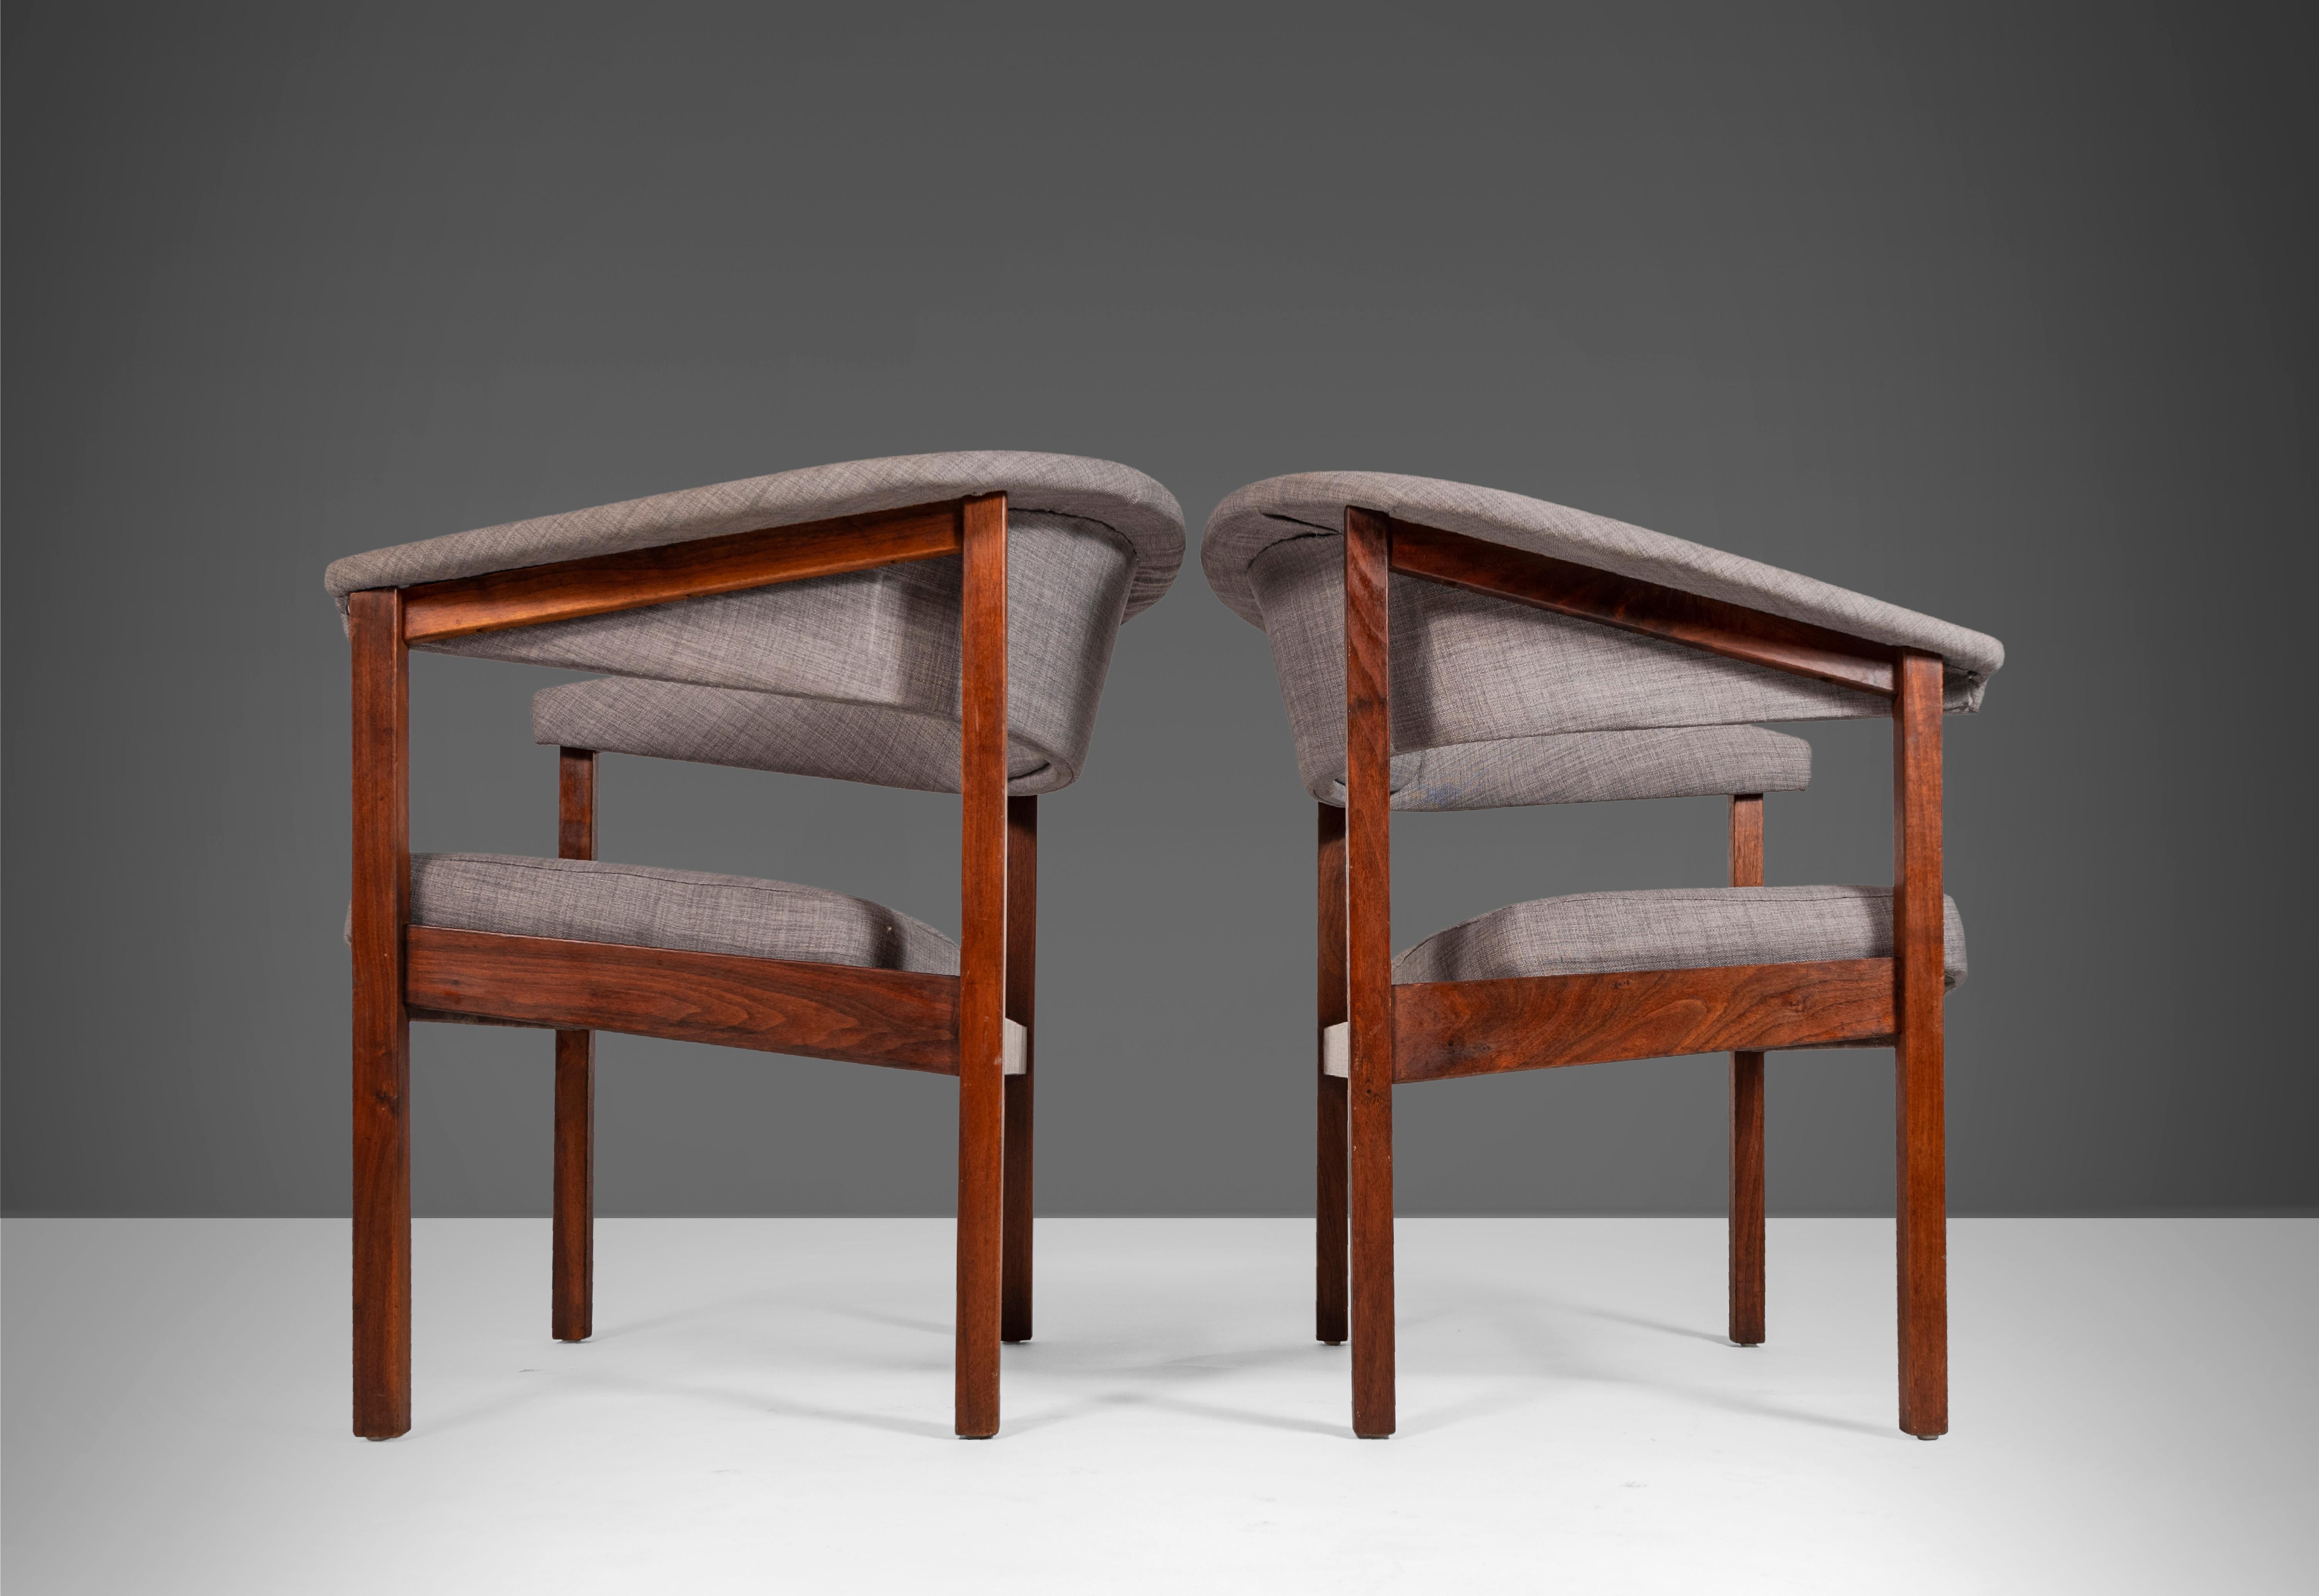 Pair of Chairs by Arthur Umanoff for Madison in Original Knit Fabric, c. 1960s For Sale 2